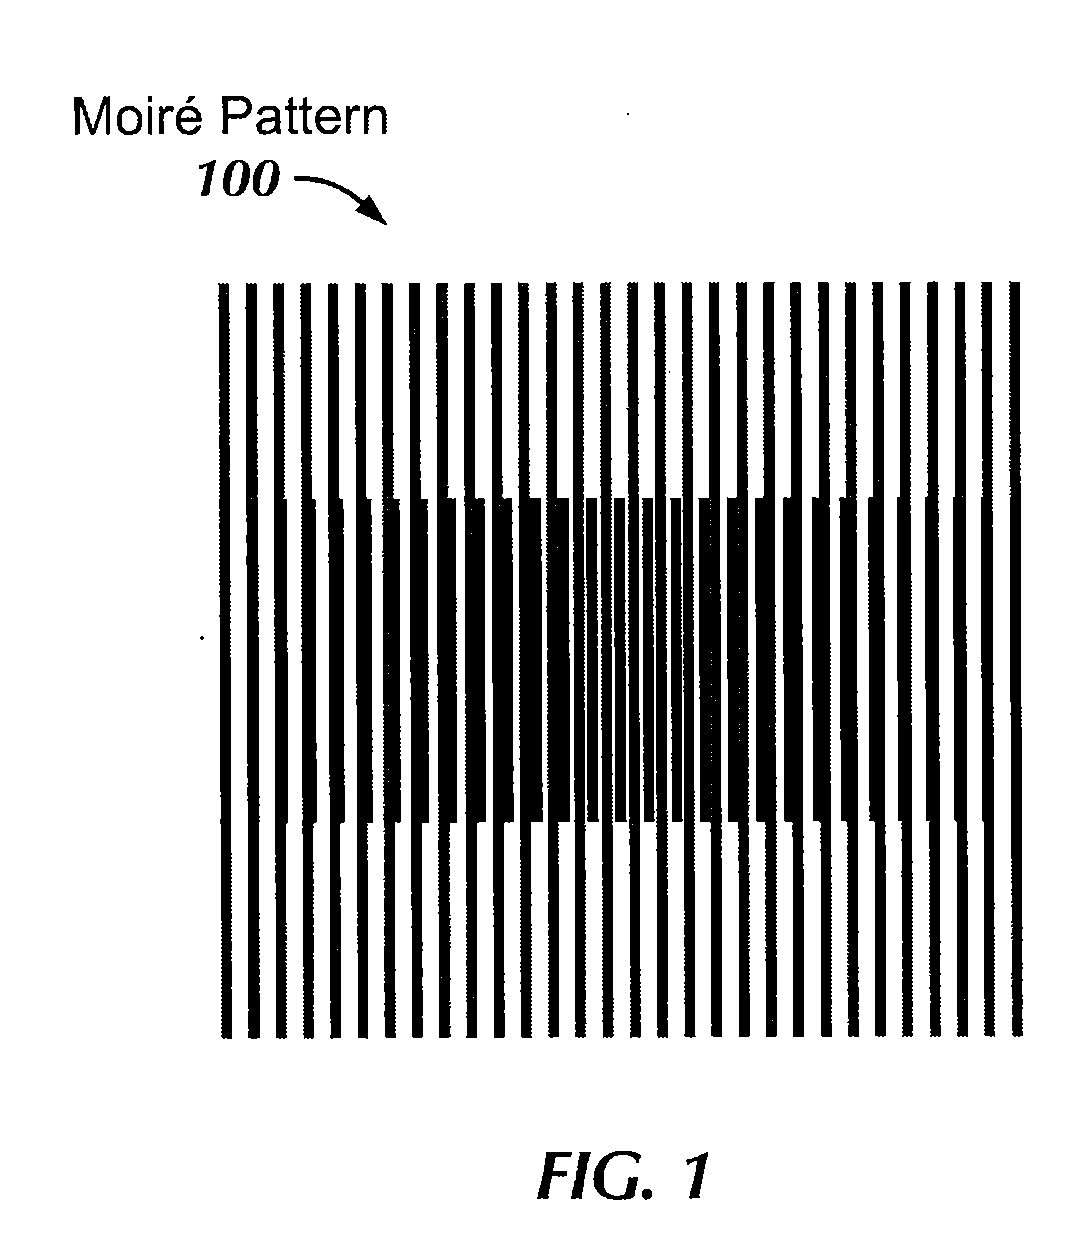 Moire-Free Touch Screen with Tilted or Curved ITO Pattern